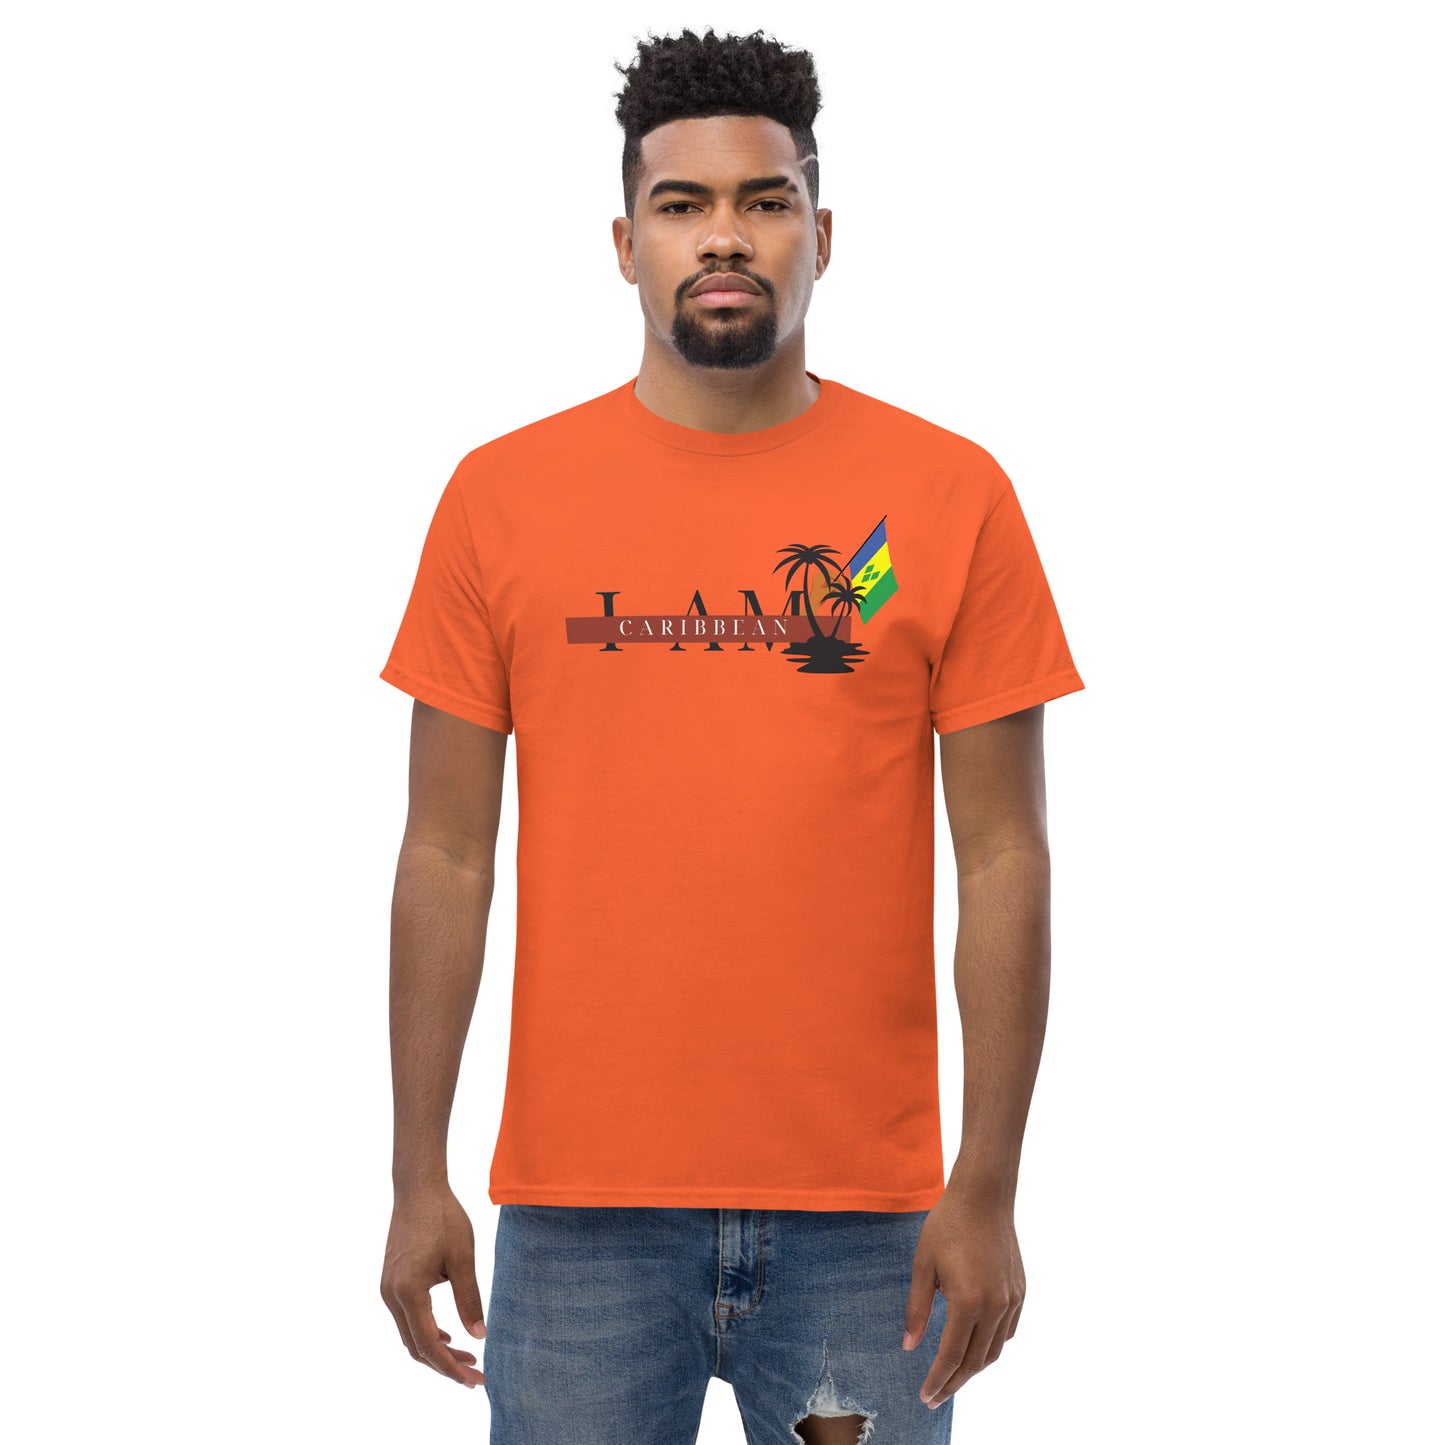 St. Vincent and the Grenadines Men's classic tee